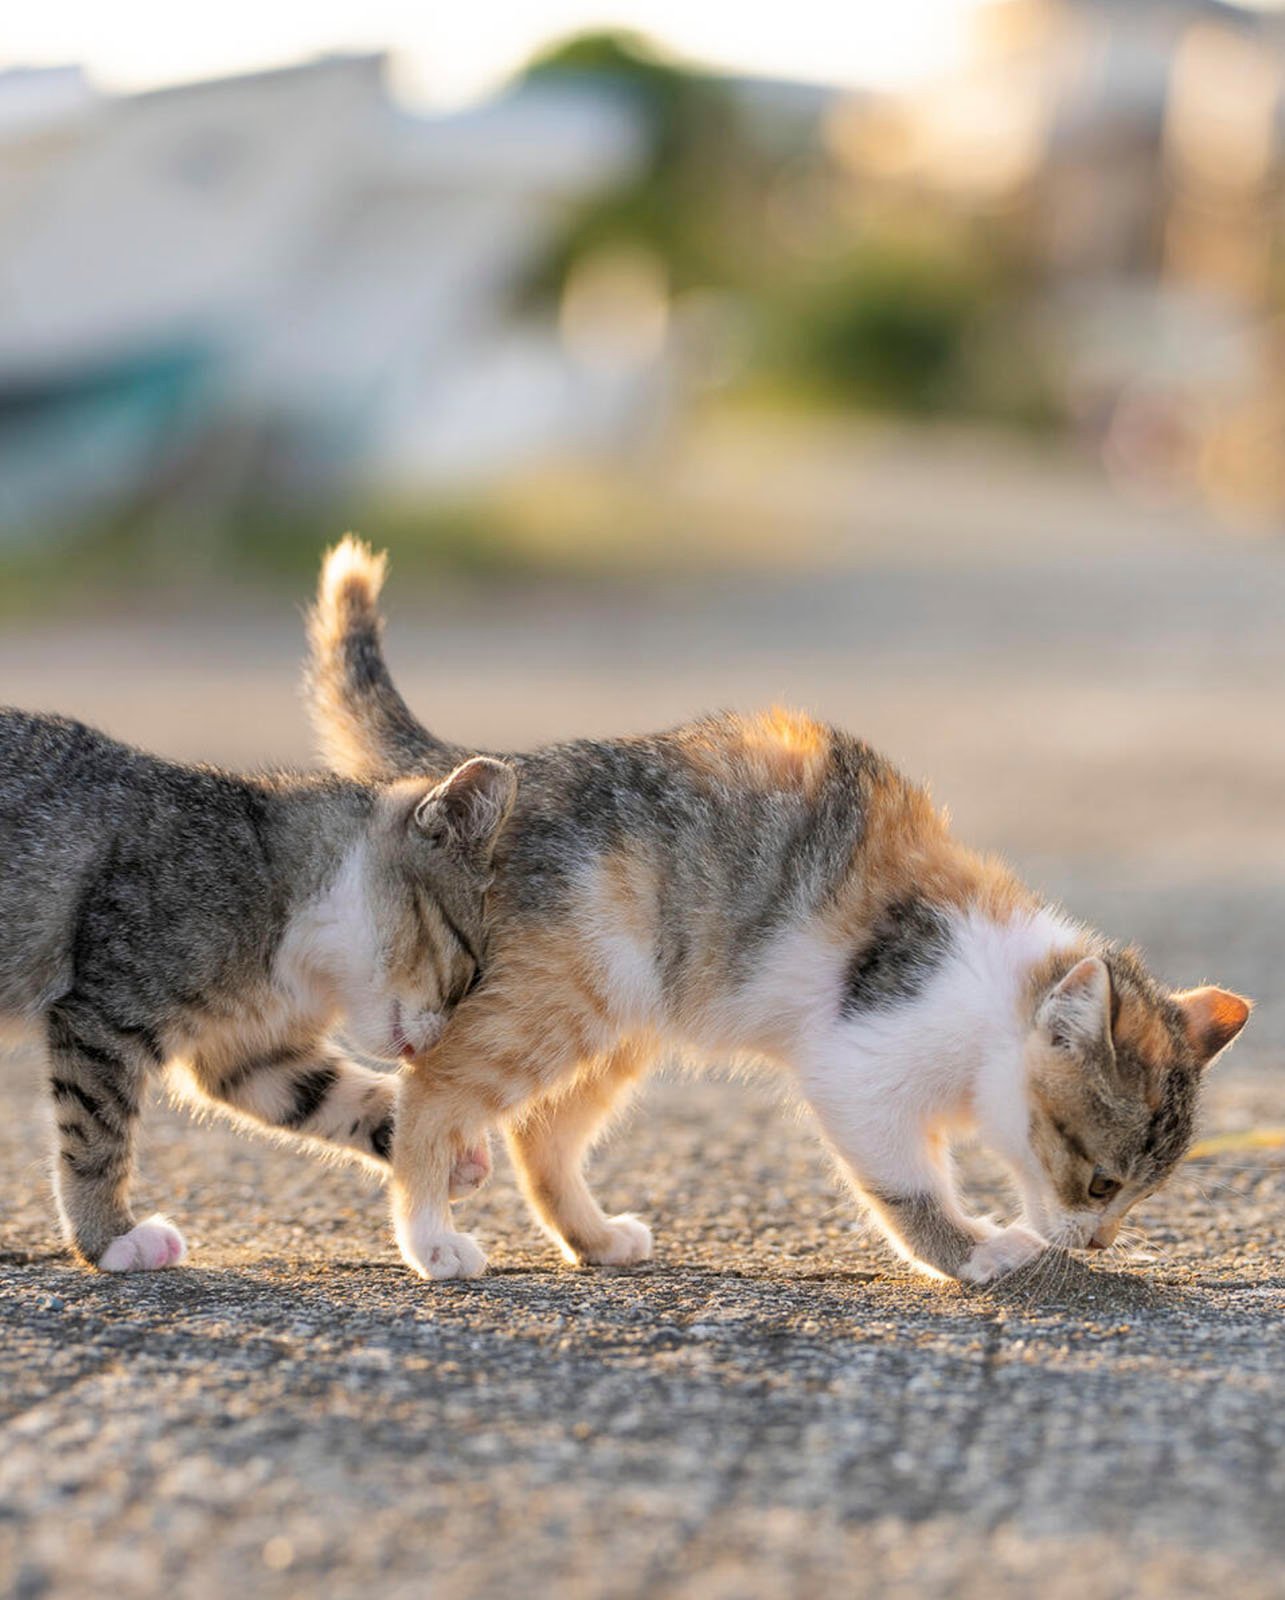 Two cats, one gray and the other calico, sniff the ground together on a sunlit road with blurry homes in the background.